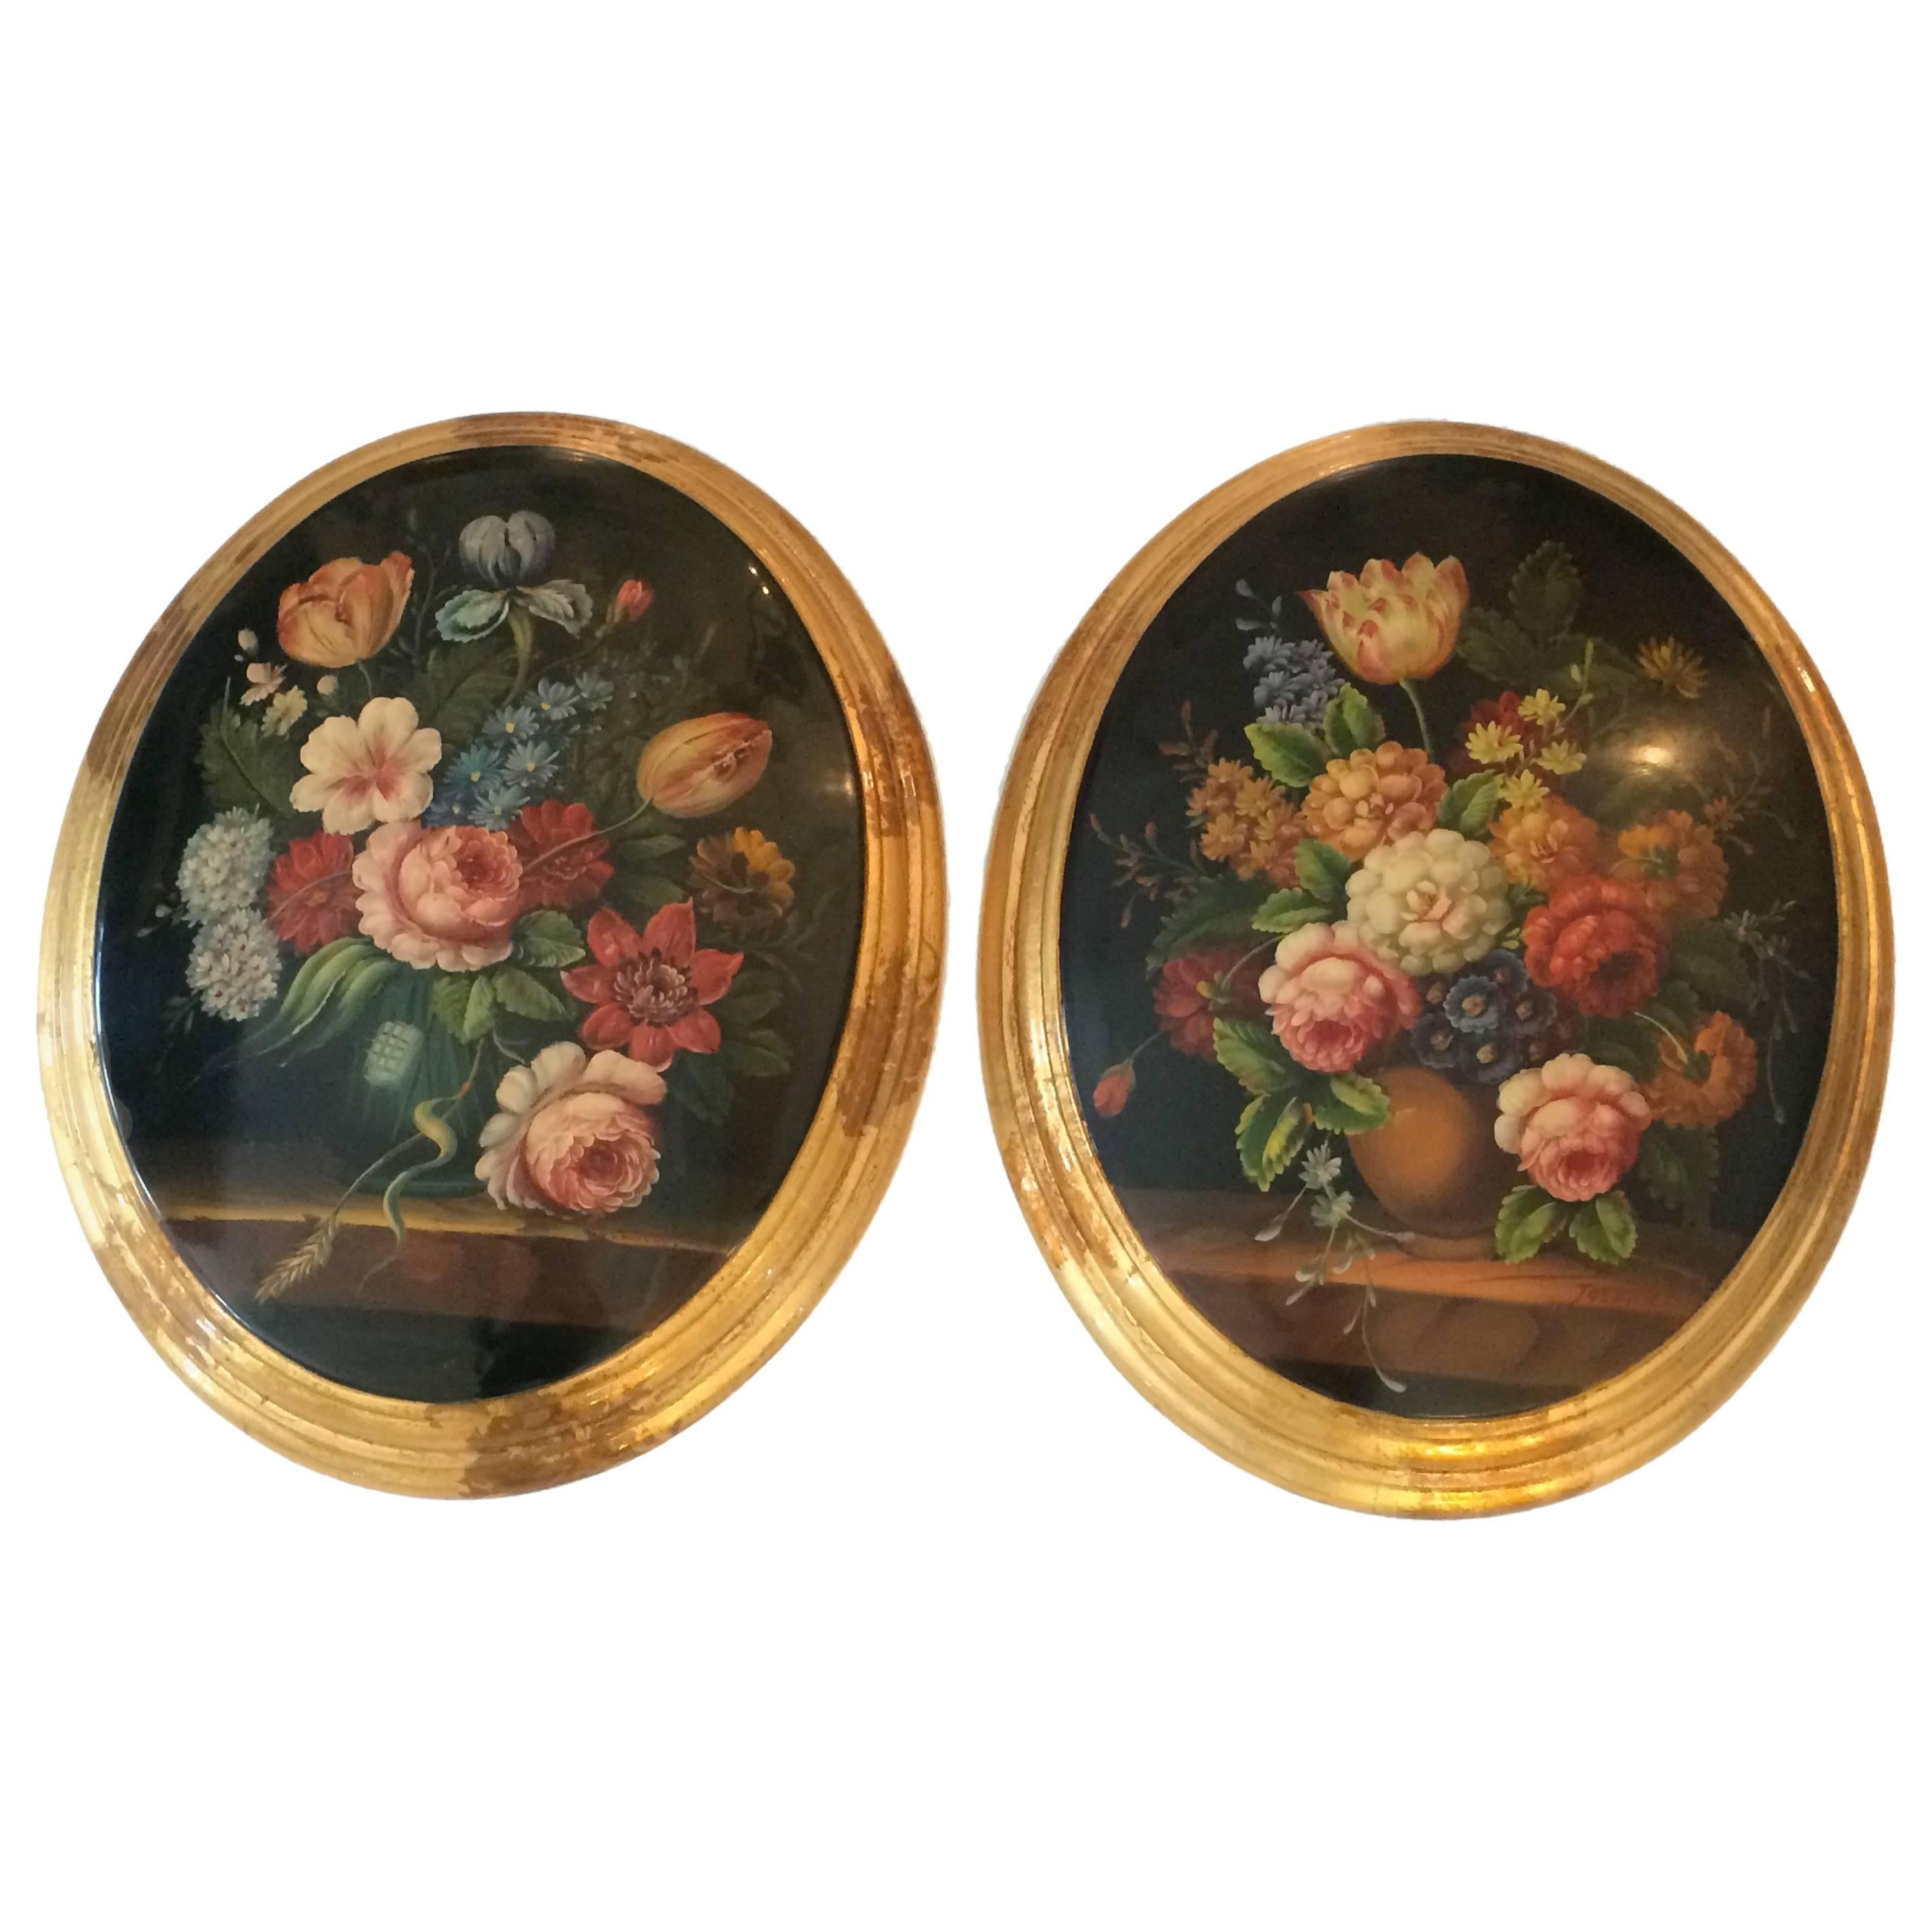 Pair of Italian Hand-Painted Oval and Giltwood Framed Still Life Paintings